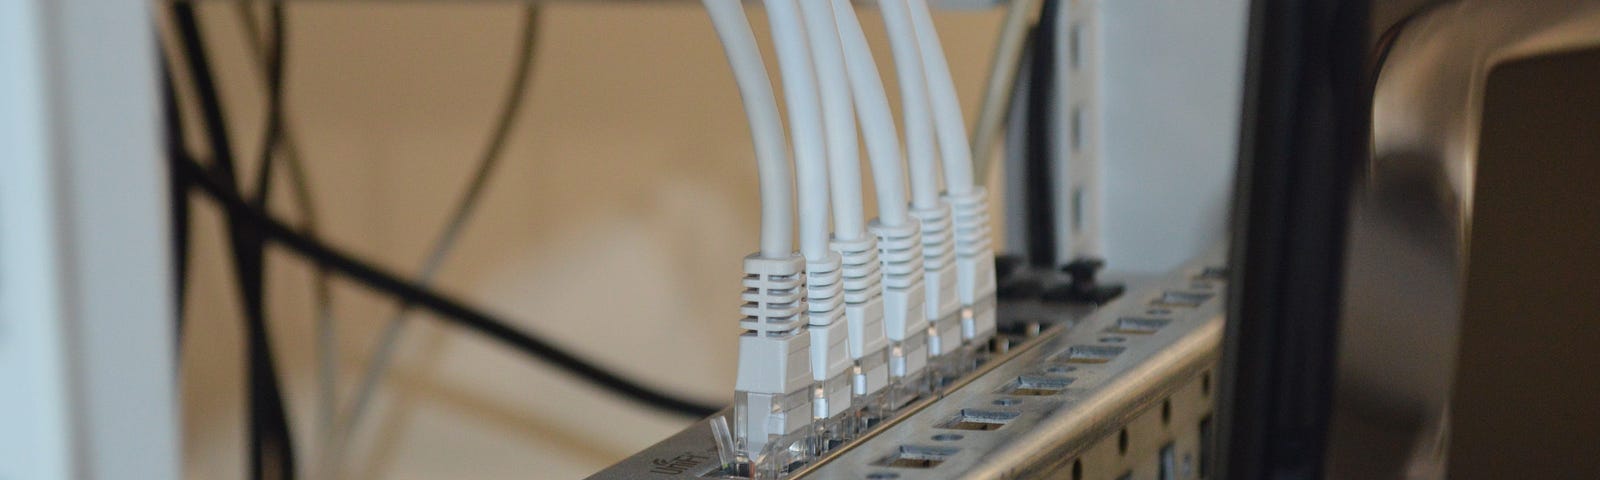 A feature image that shows network cables connected to a device.